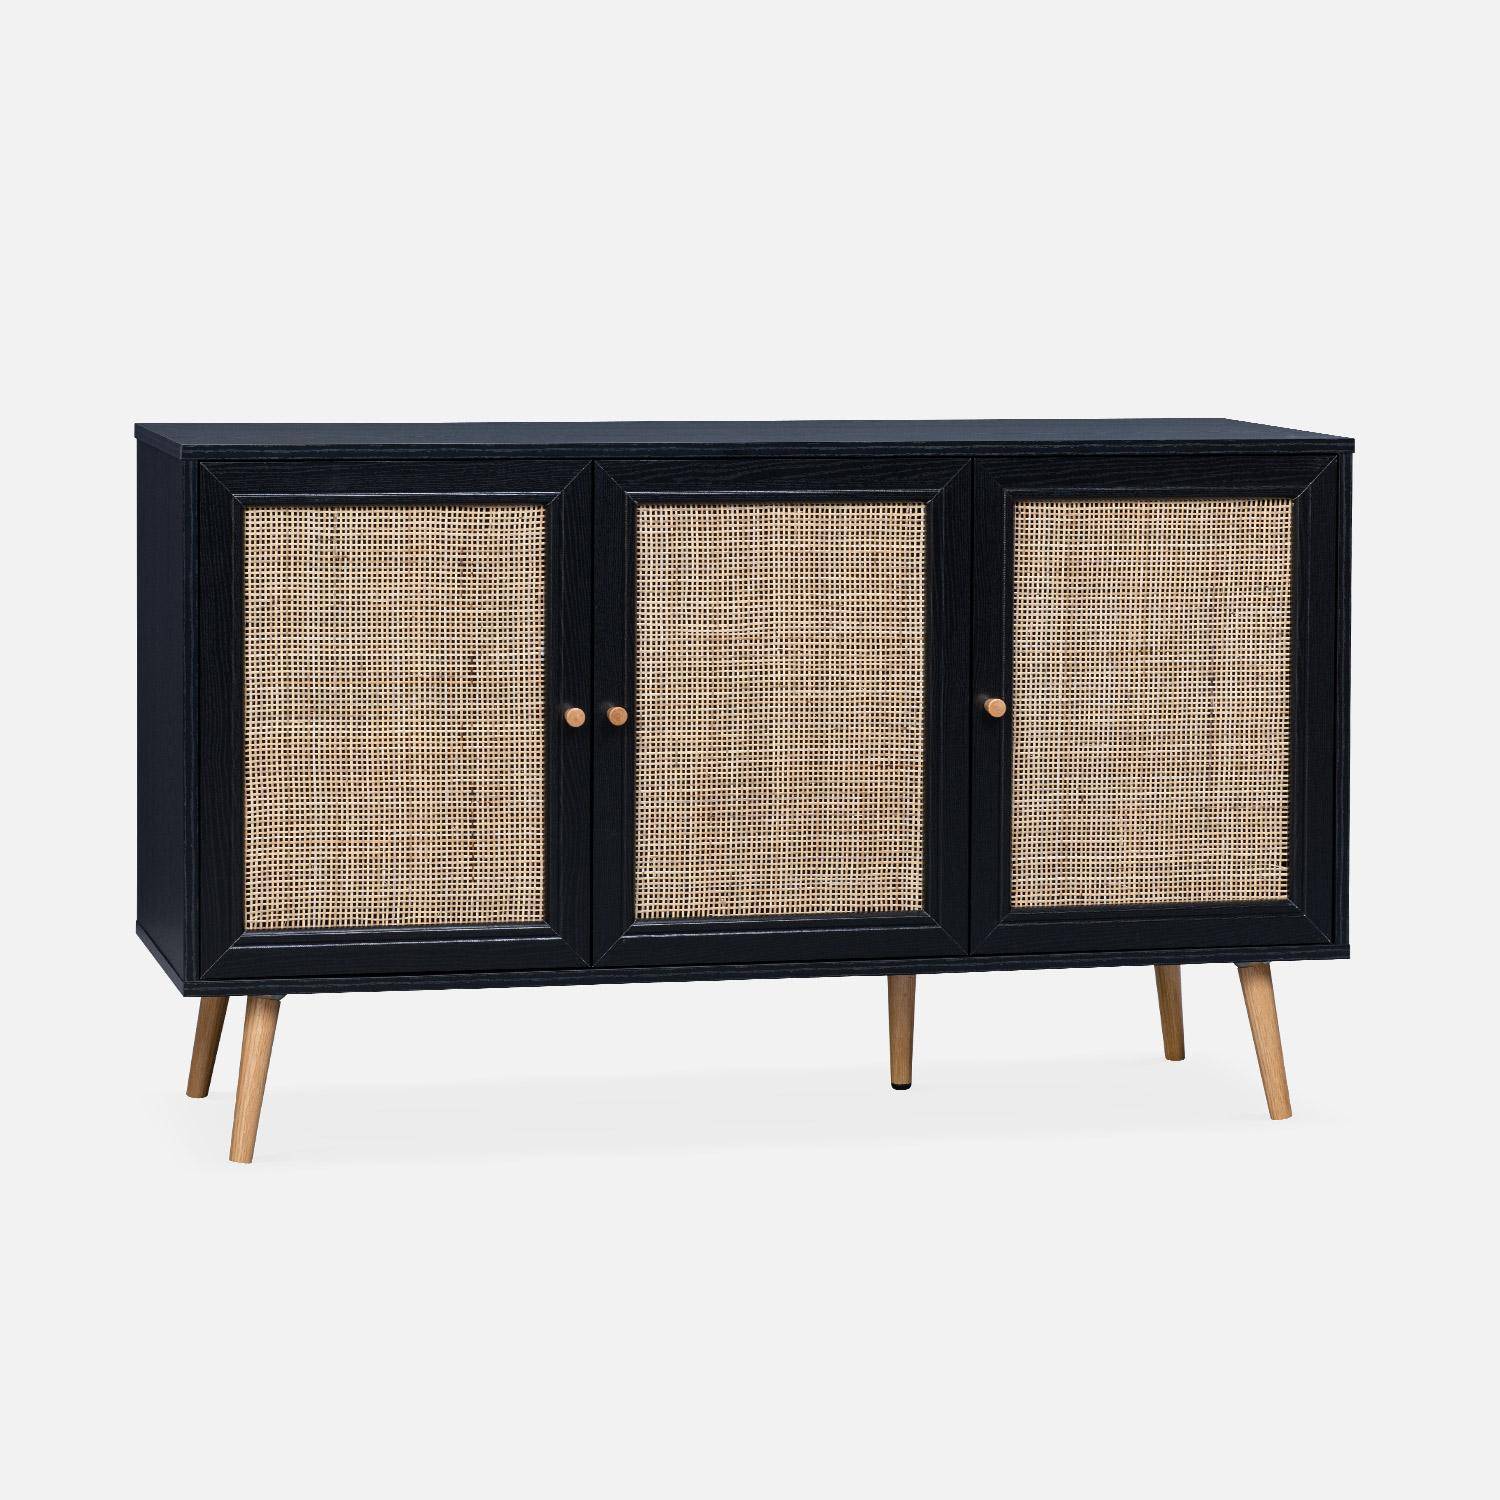 Wooden and cane rattan detail sideboard with 3 doors, 2 shelves, Scandi-style legs, 120x39x70cm - Boheme - Black Photo3